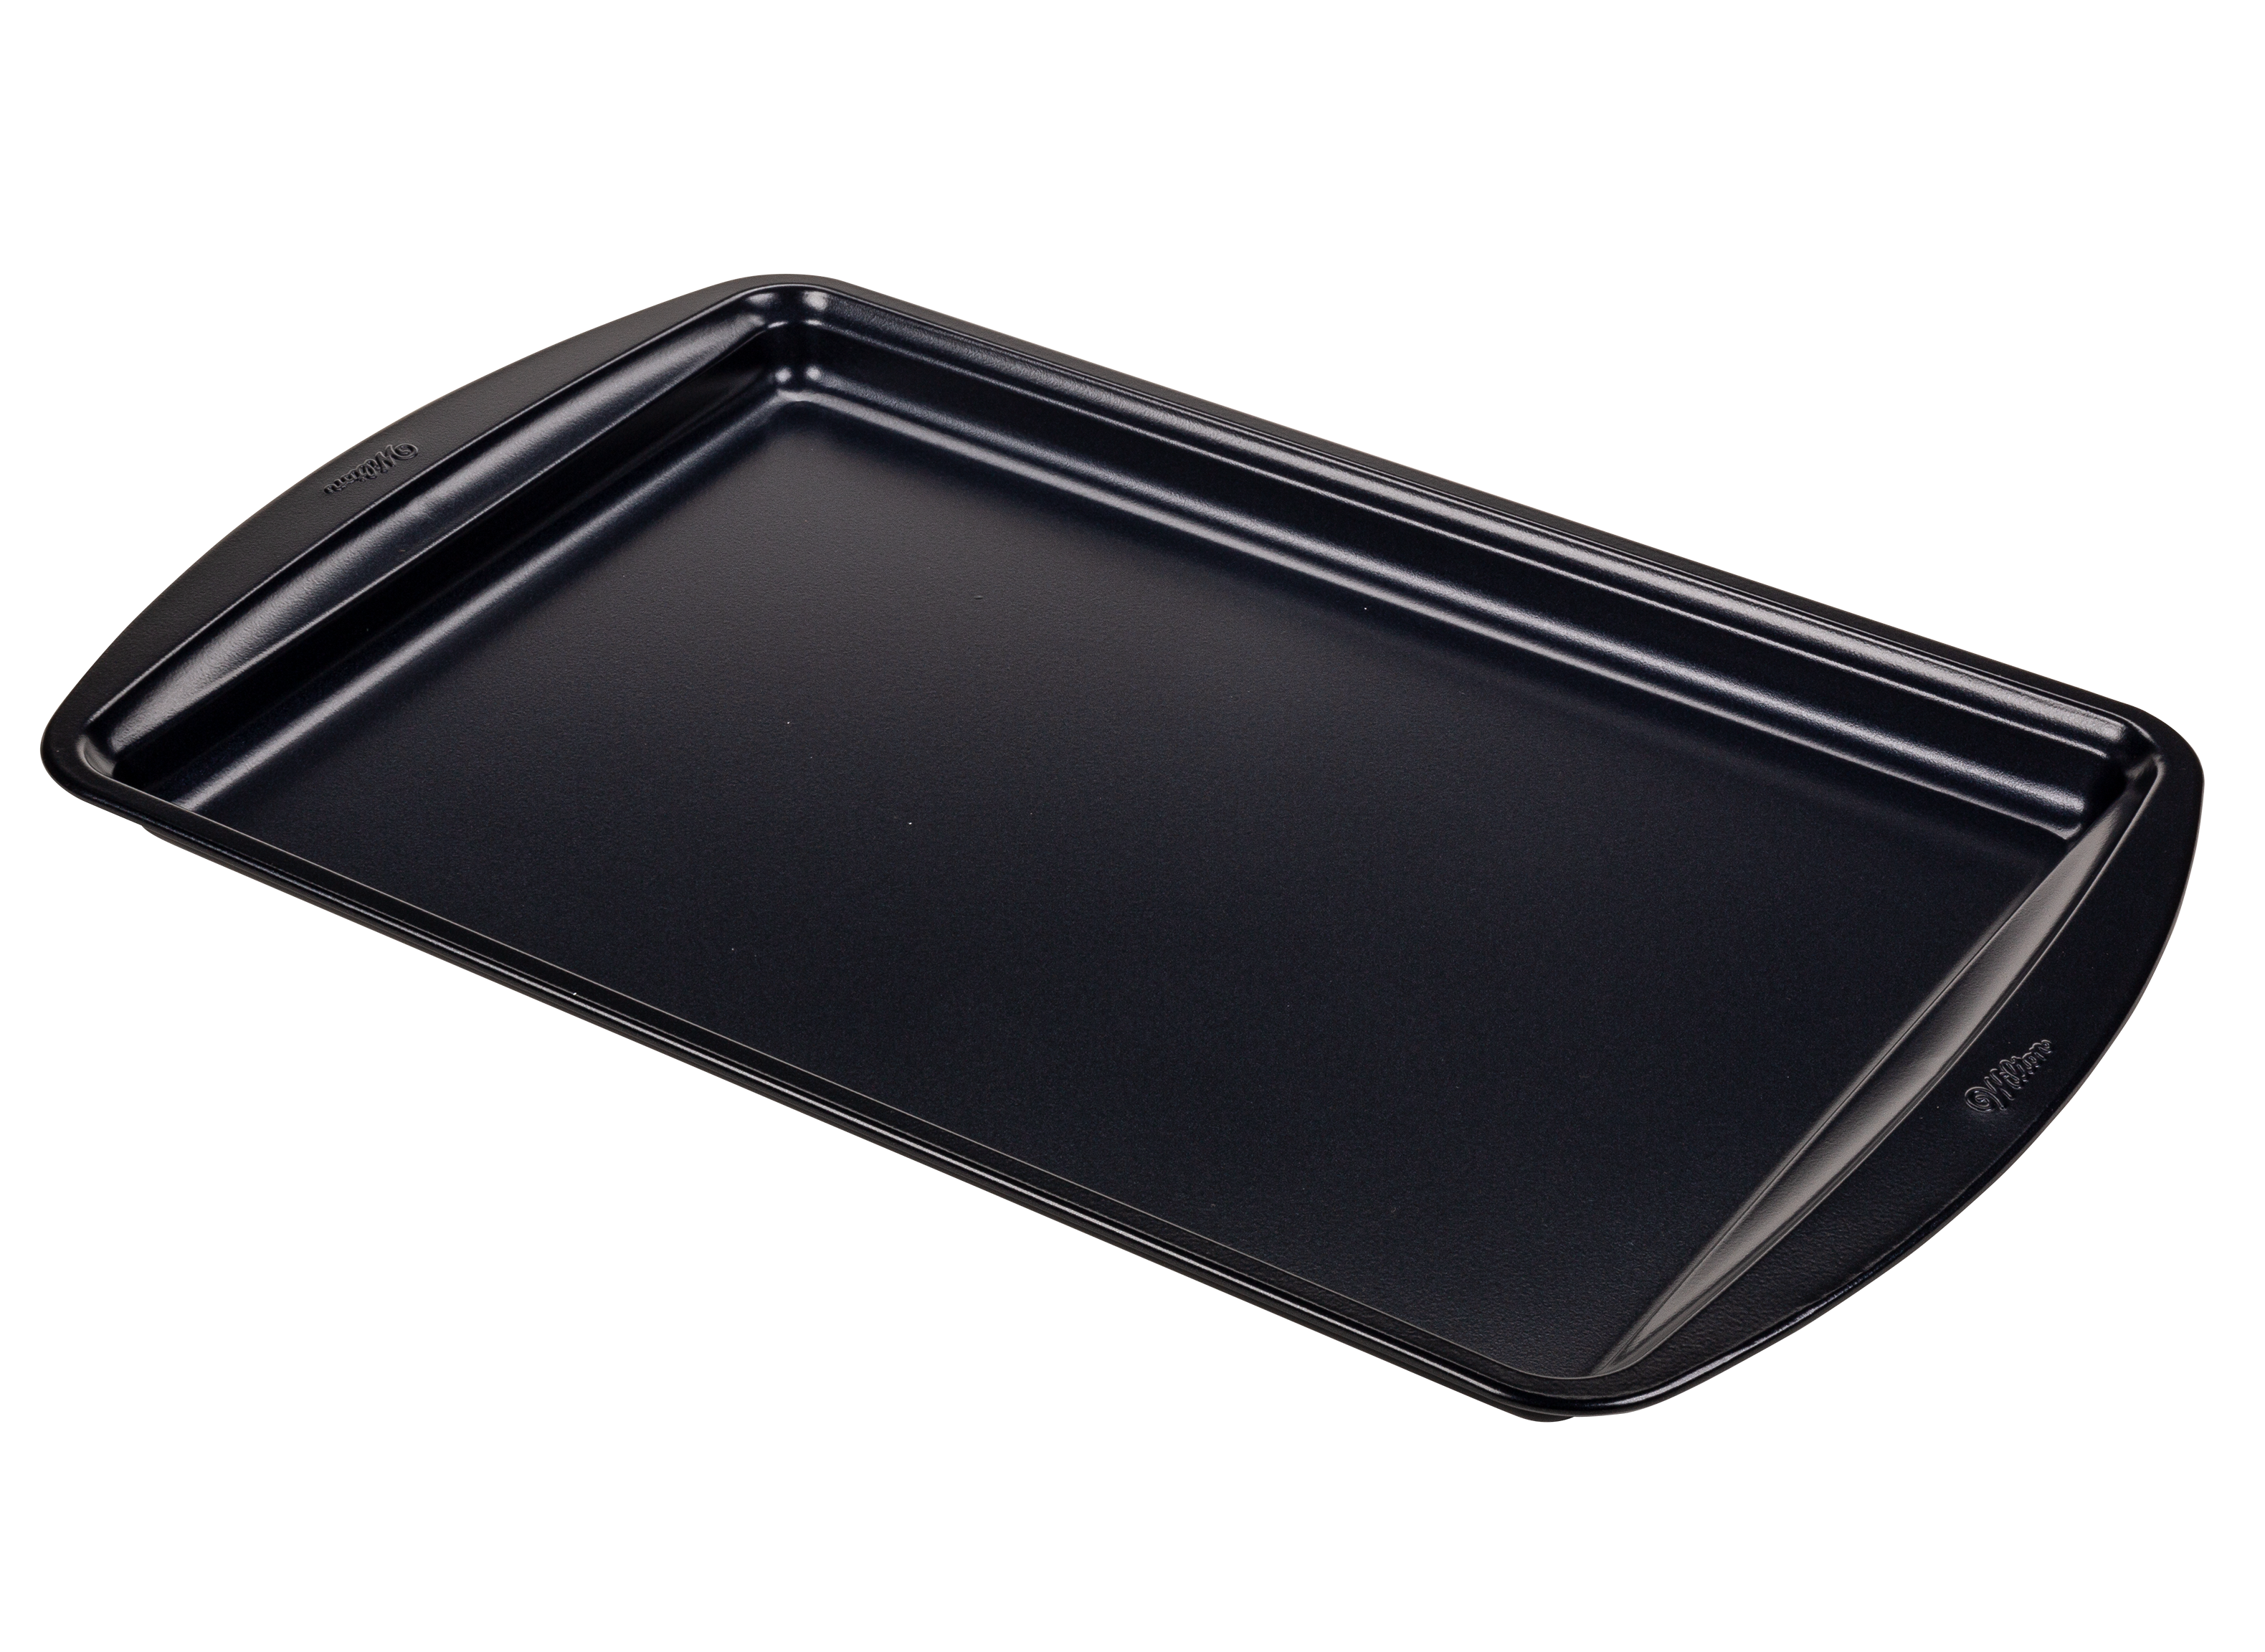 https://crdms.images.consumerreports.org/prod/products/cr/models/404181-sheet-pans-wilton-diamond-infused-non-stick-medium-baking-sheet-10022115.png